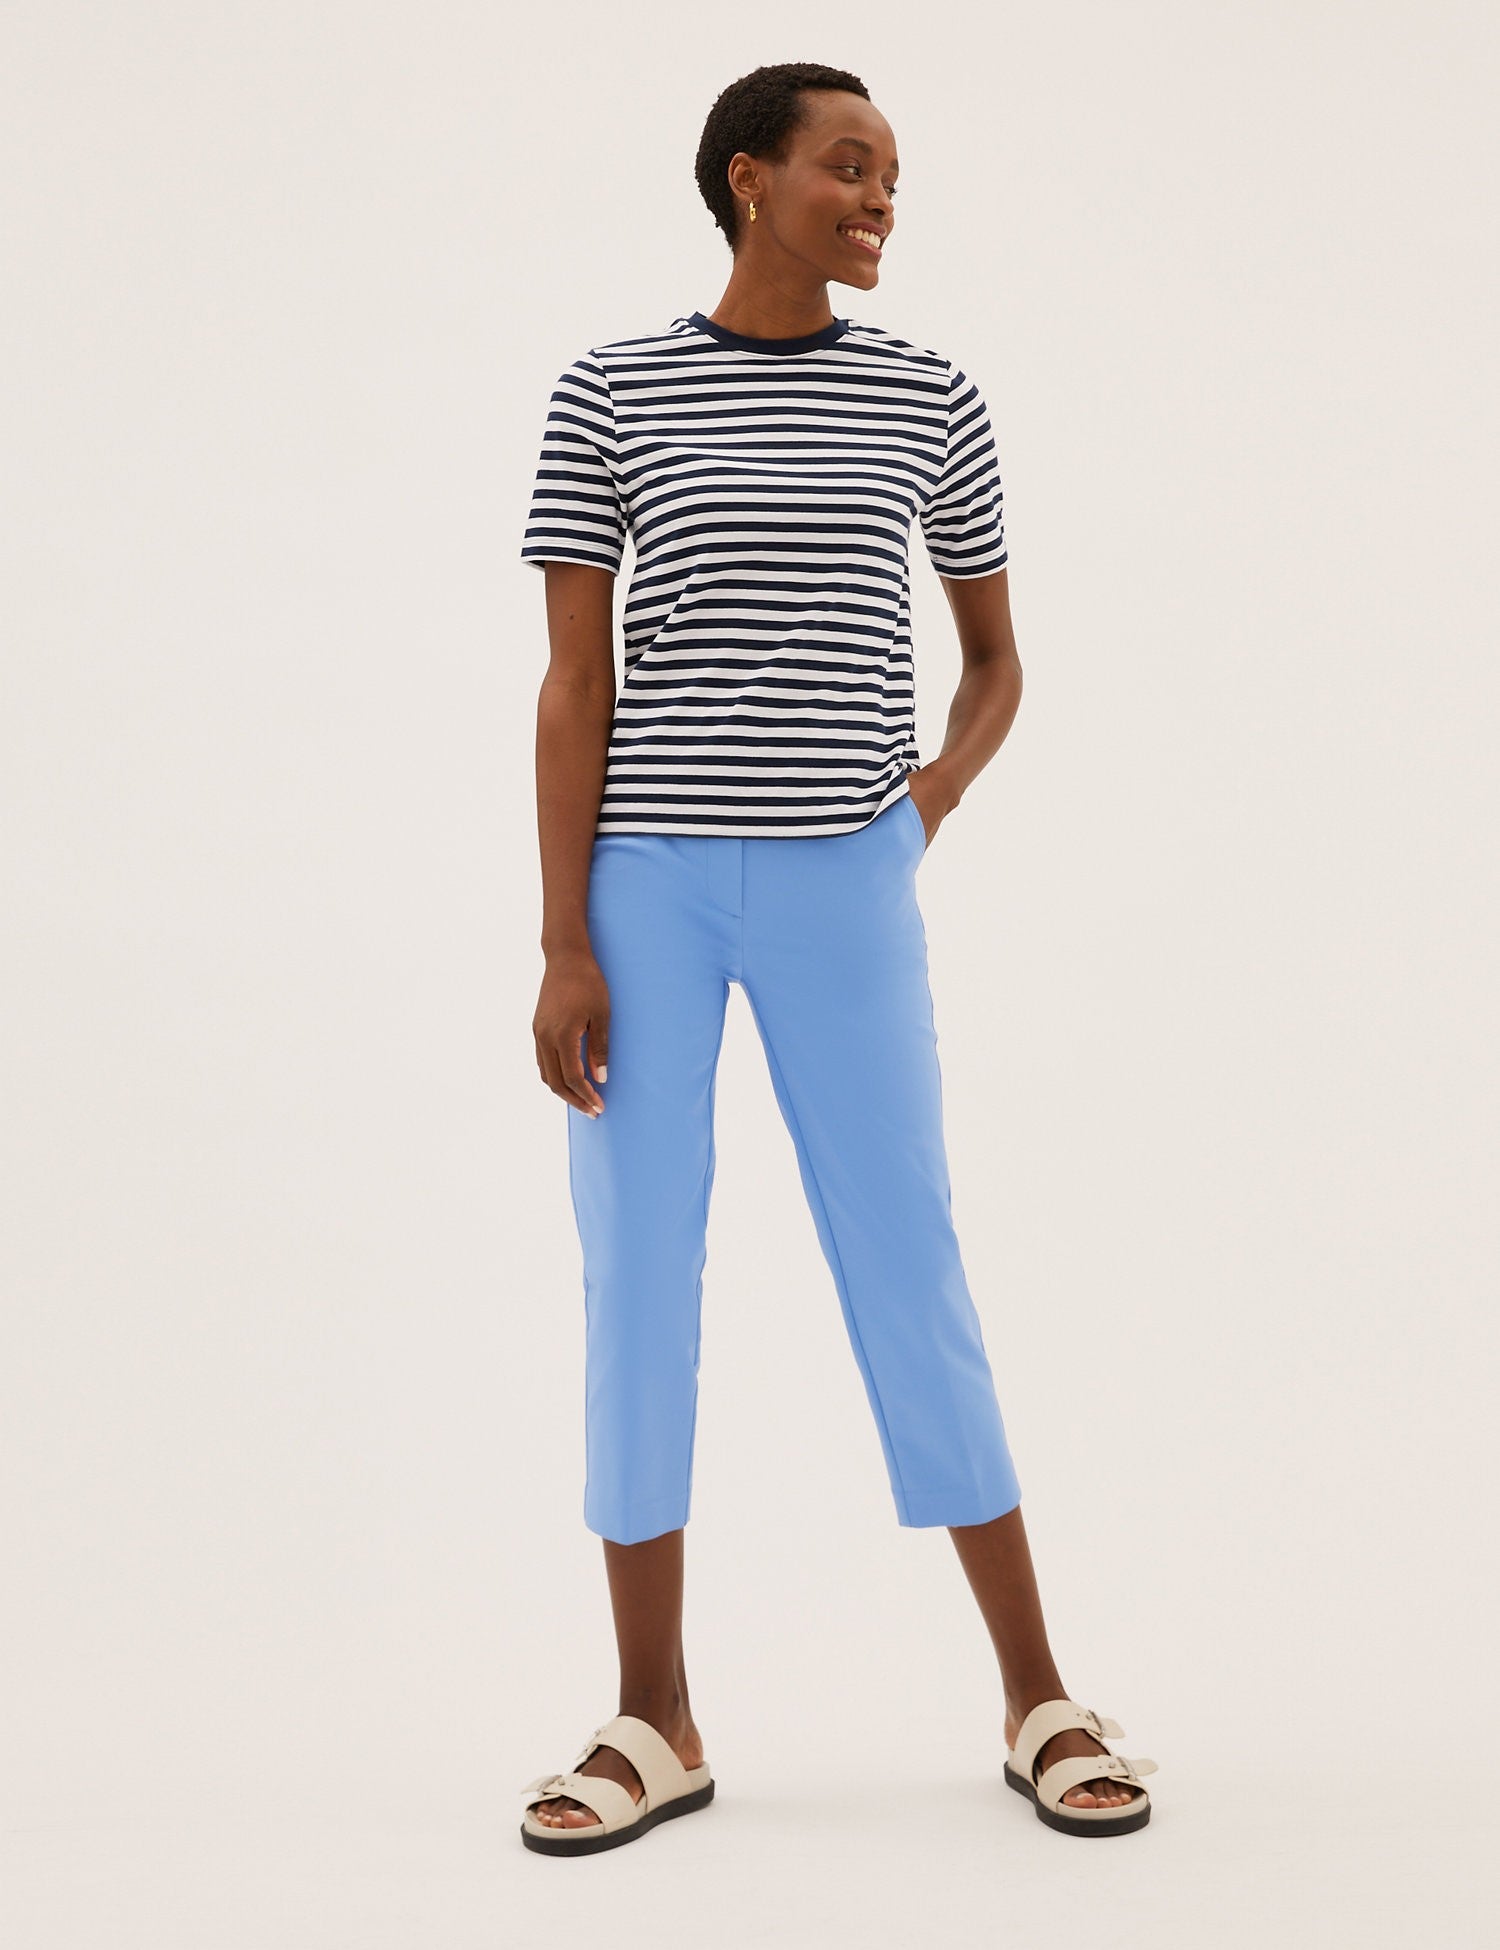 Cotton Blend Slim Fit Cropped Trousers